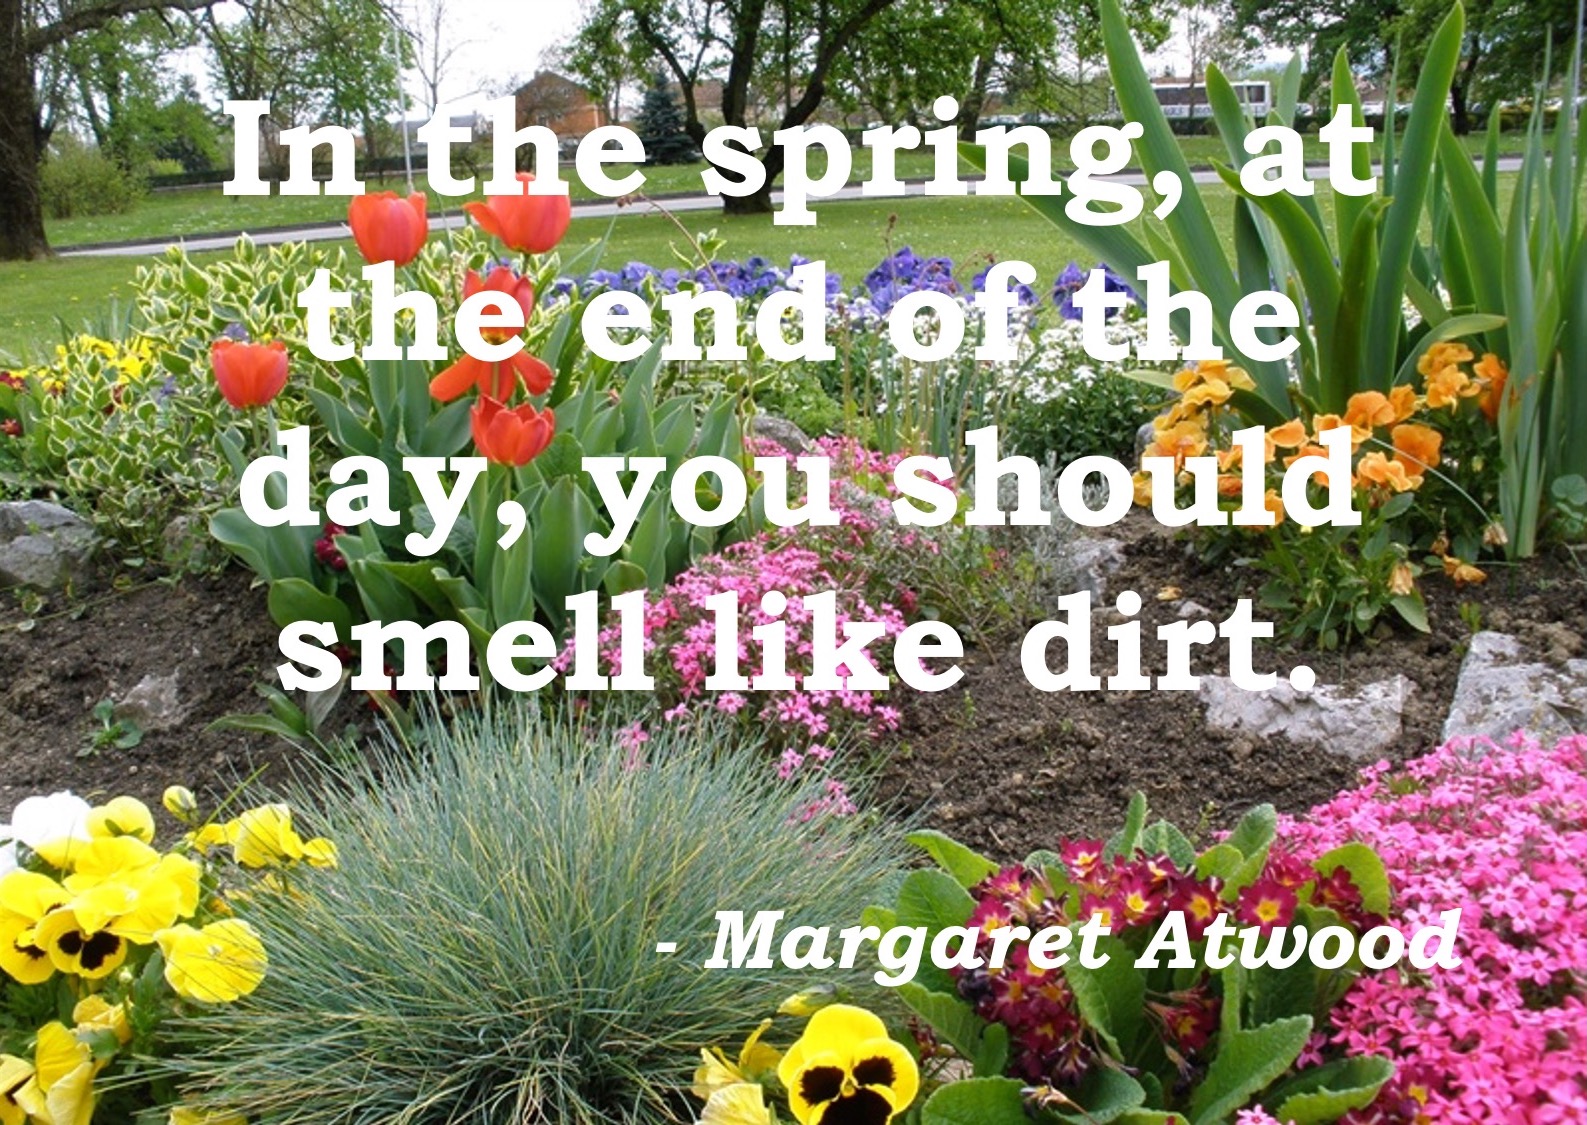 Spring garden with quote over top: In the spring, at the end of the day, you should smell like dirt. - Margaret Atwood